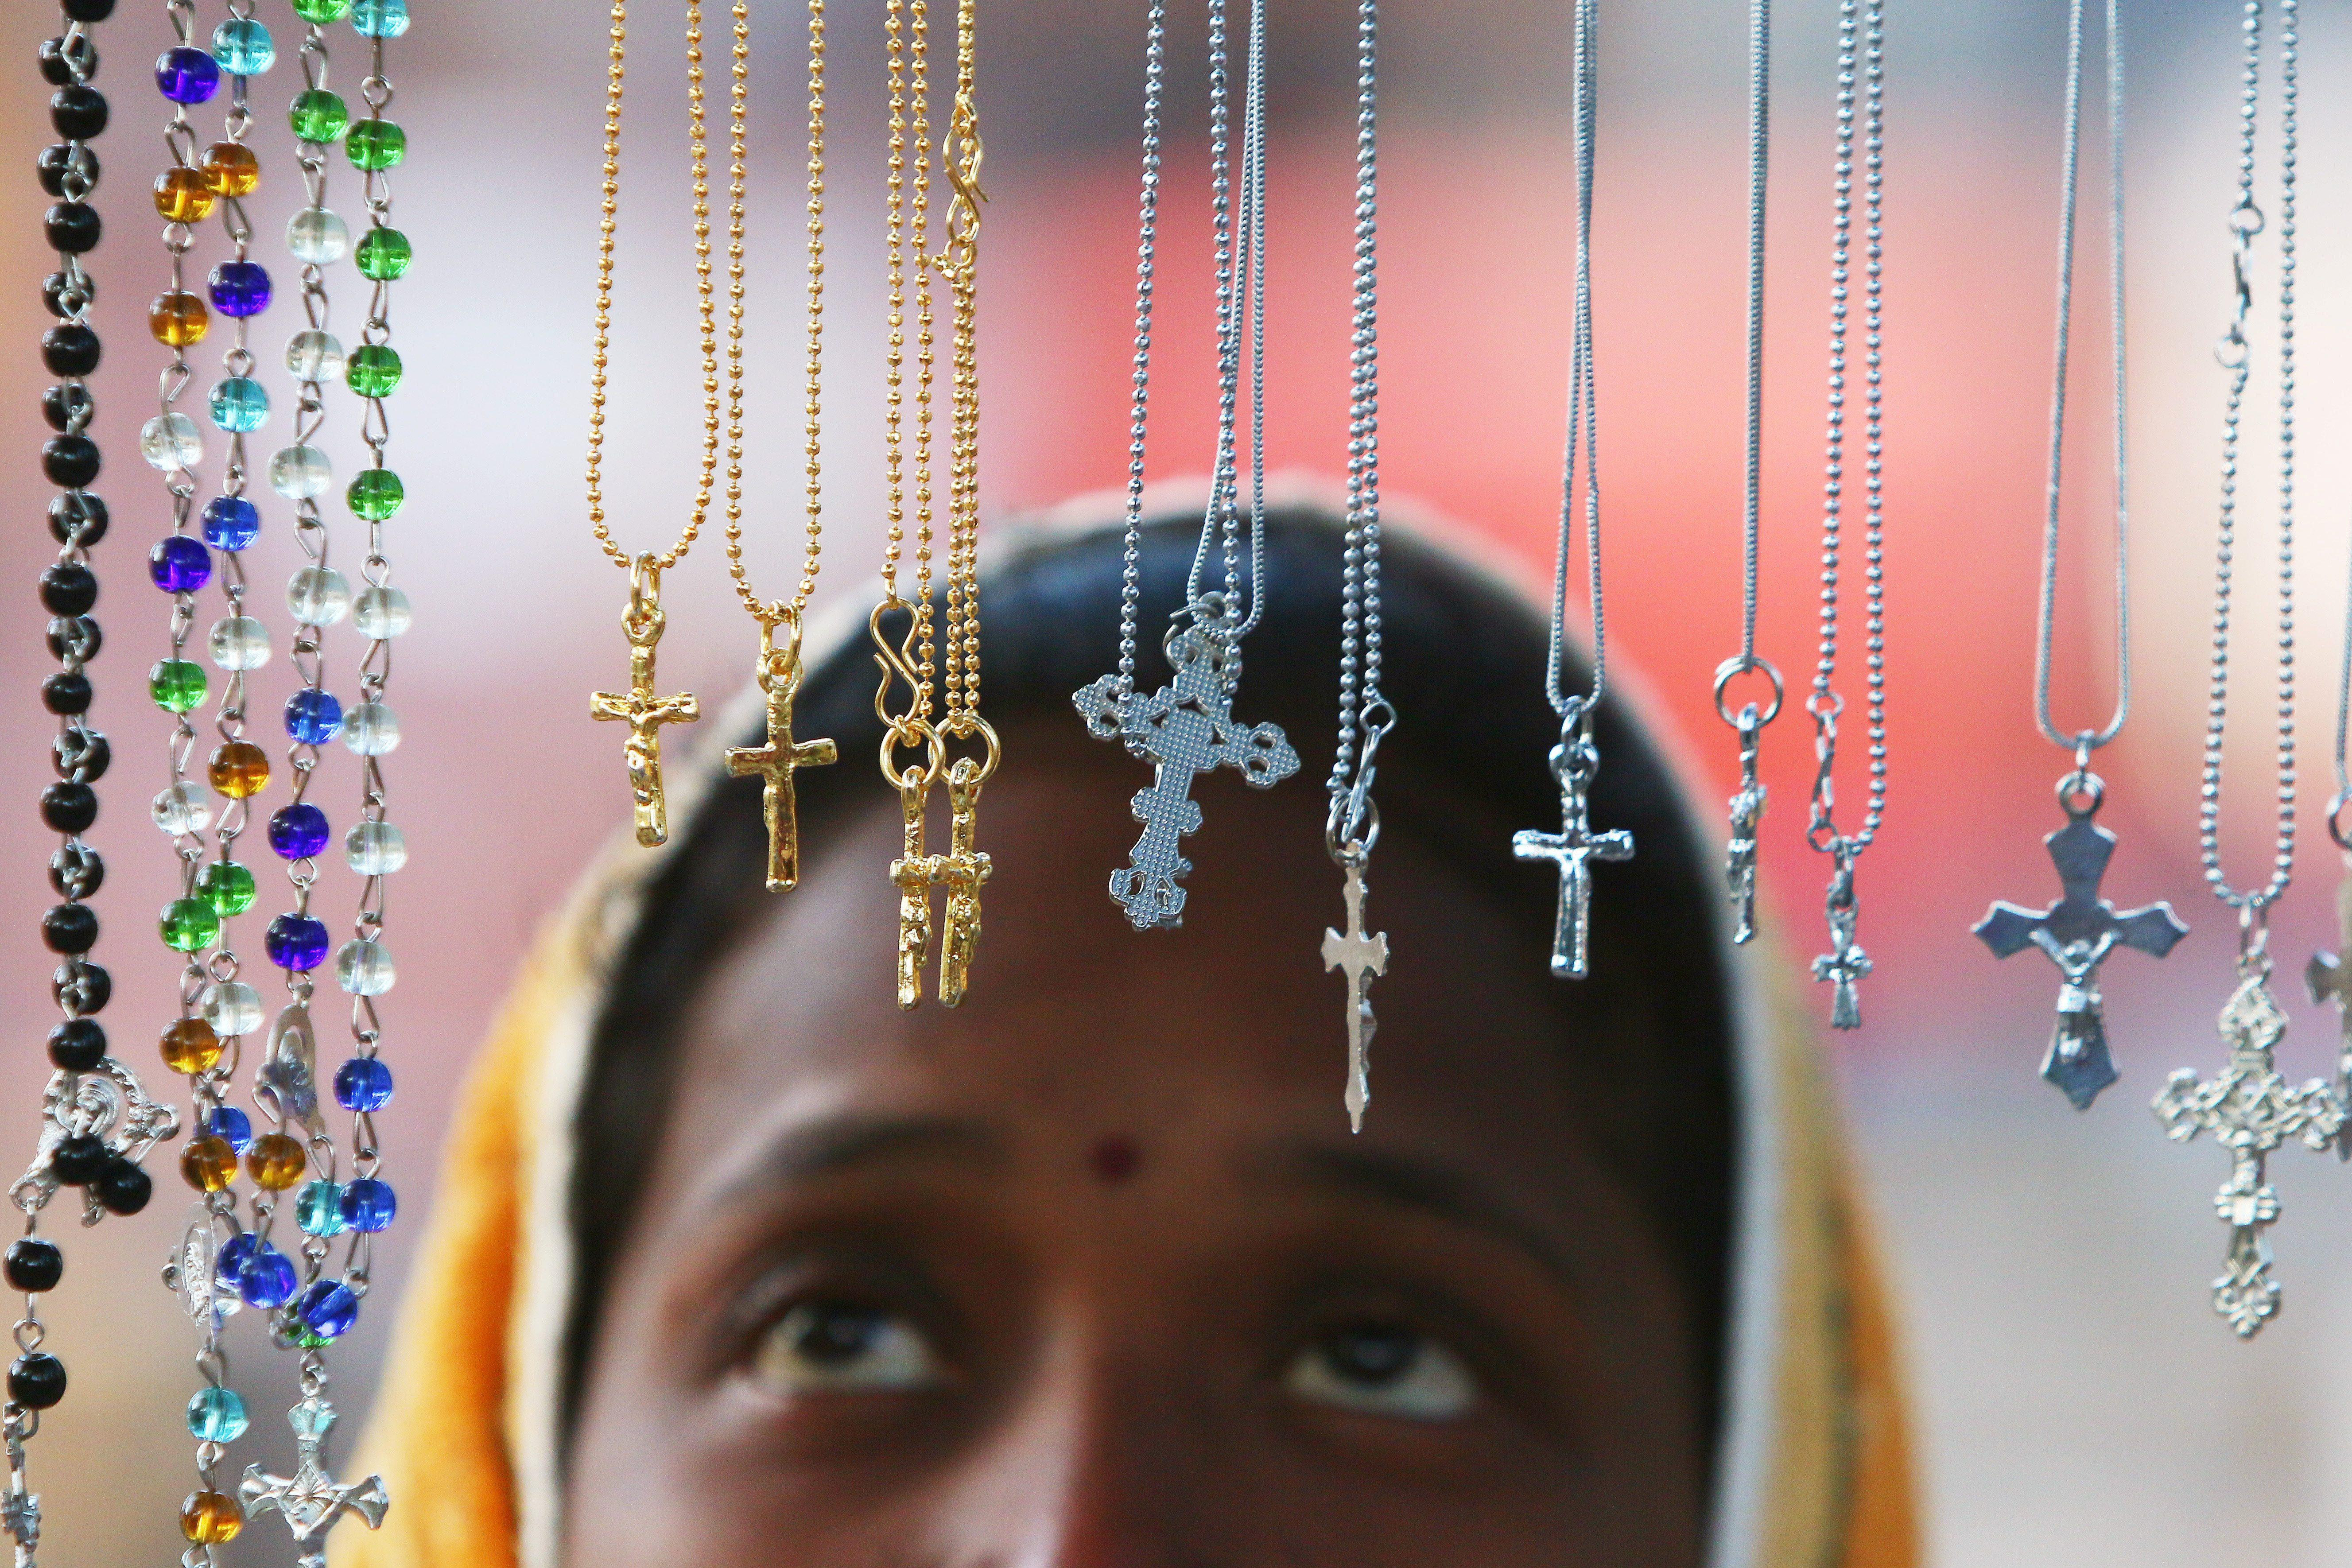 Are the mass Christian conversions in Punjab fact or fiction?